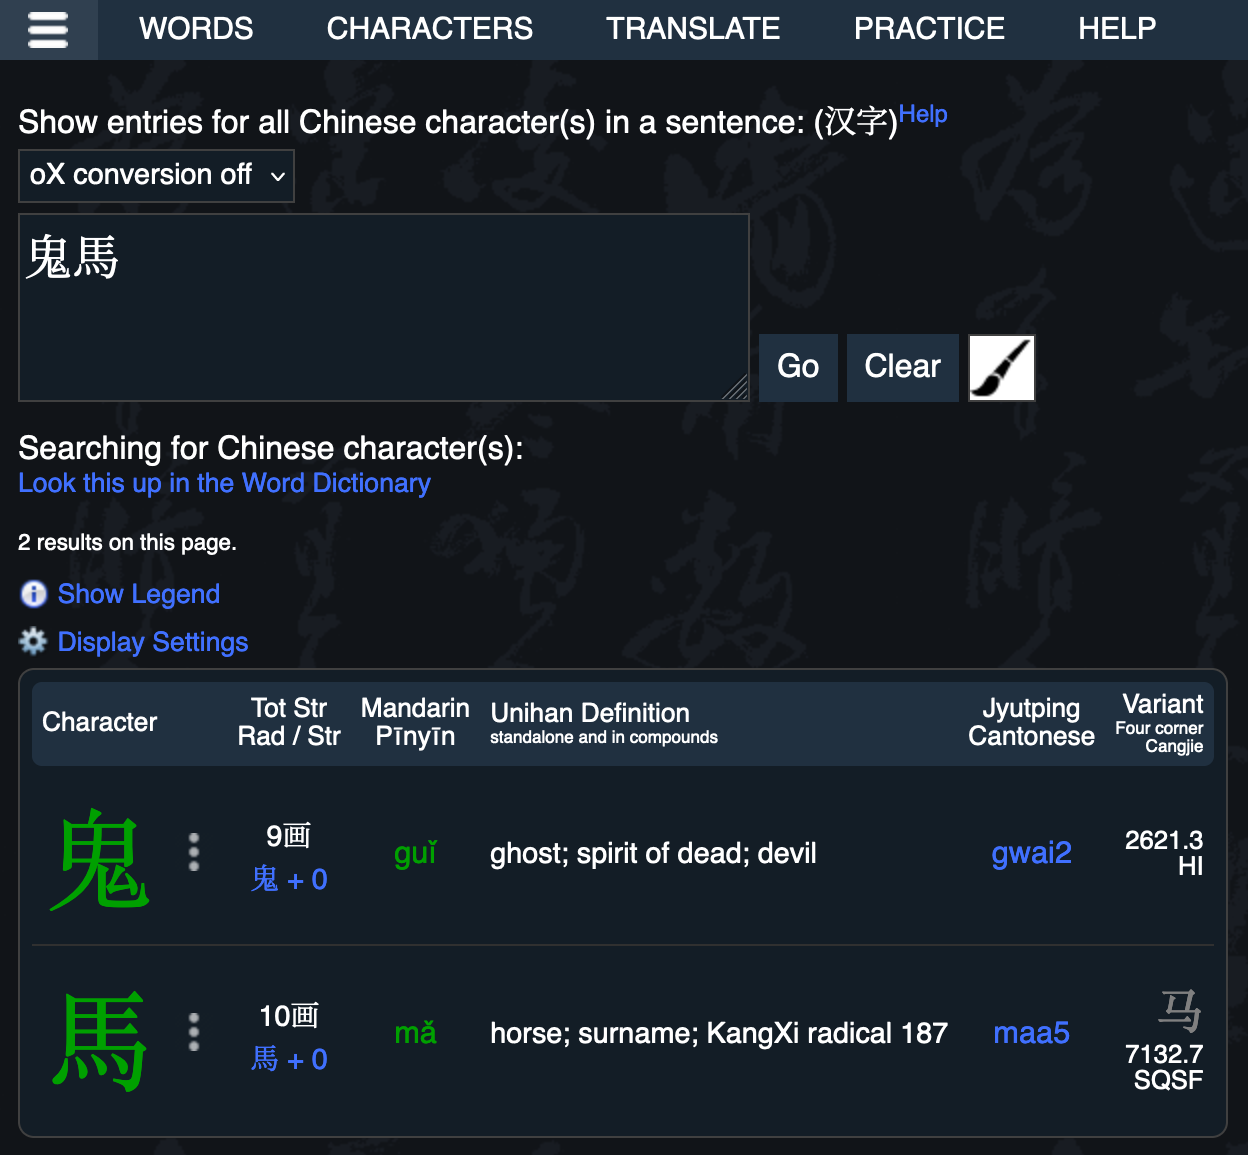 An MDBG screenshot showing the results of looking up 鬼馬 in their character dictionary, which shows both Mandarin and Cantonese pronunication guides.